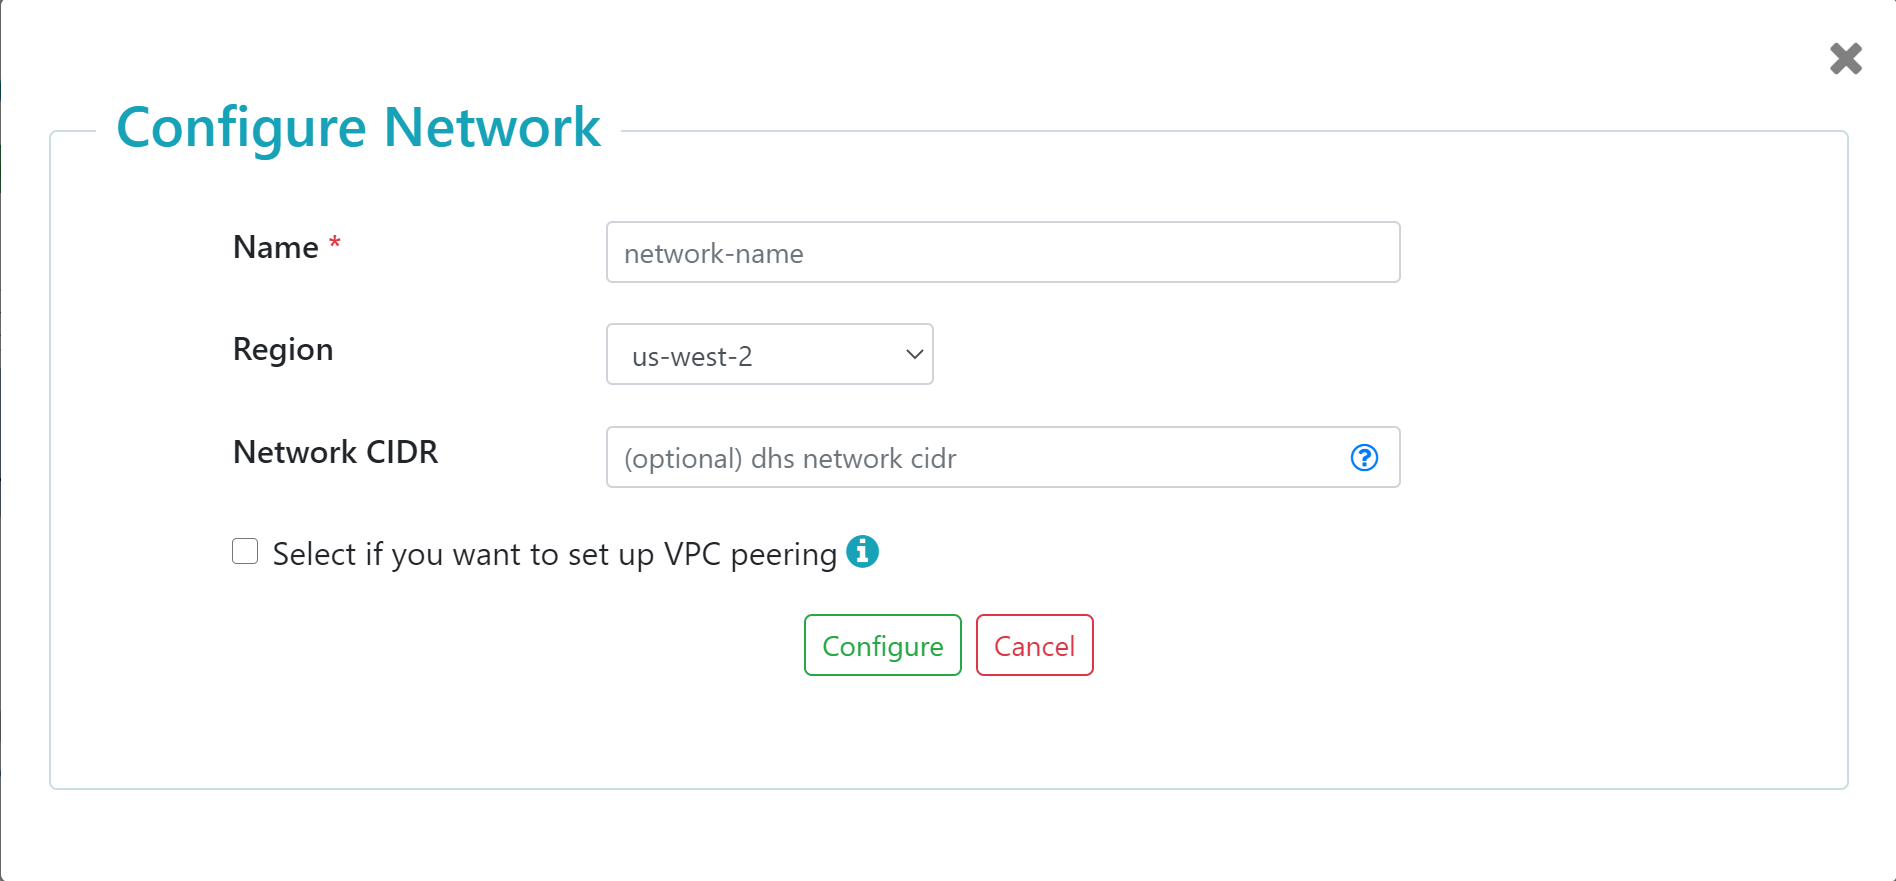 Configure Network page